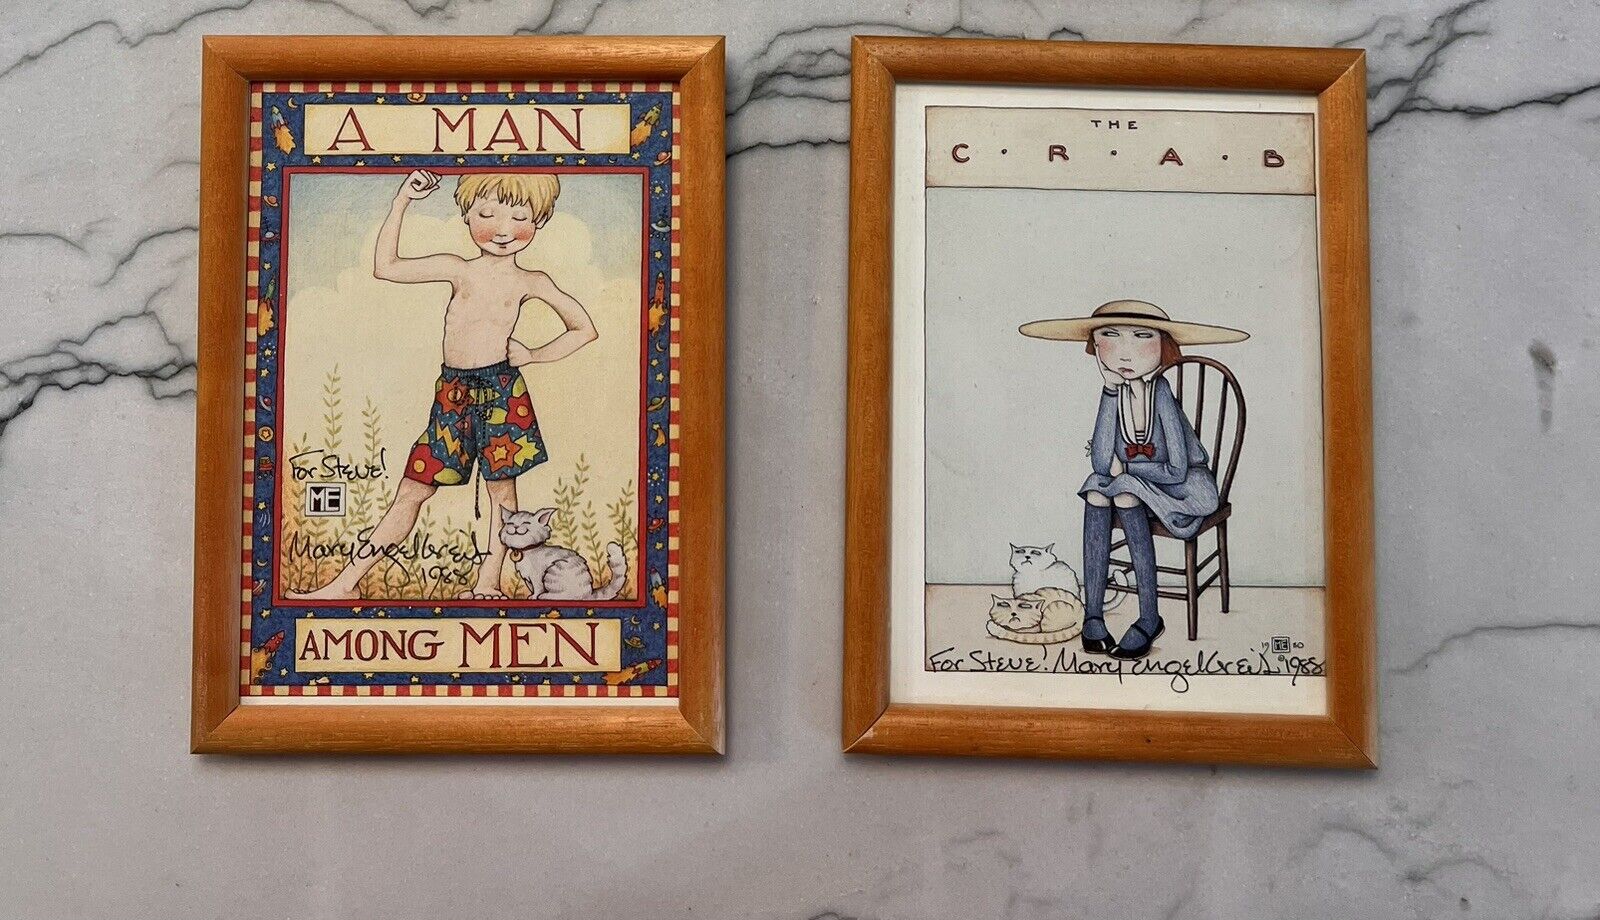 “The Crab” And “A Man Among Men” Mary Engelbreit Autographed Print - 5.5” X 7.5”